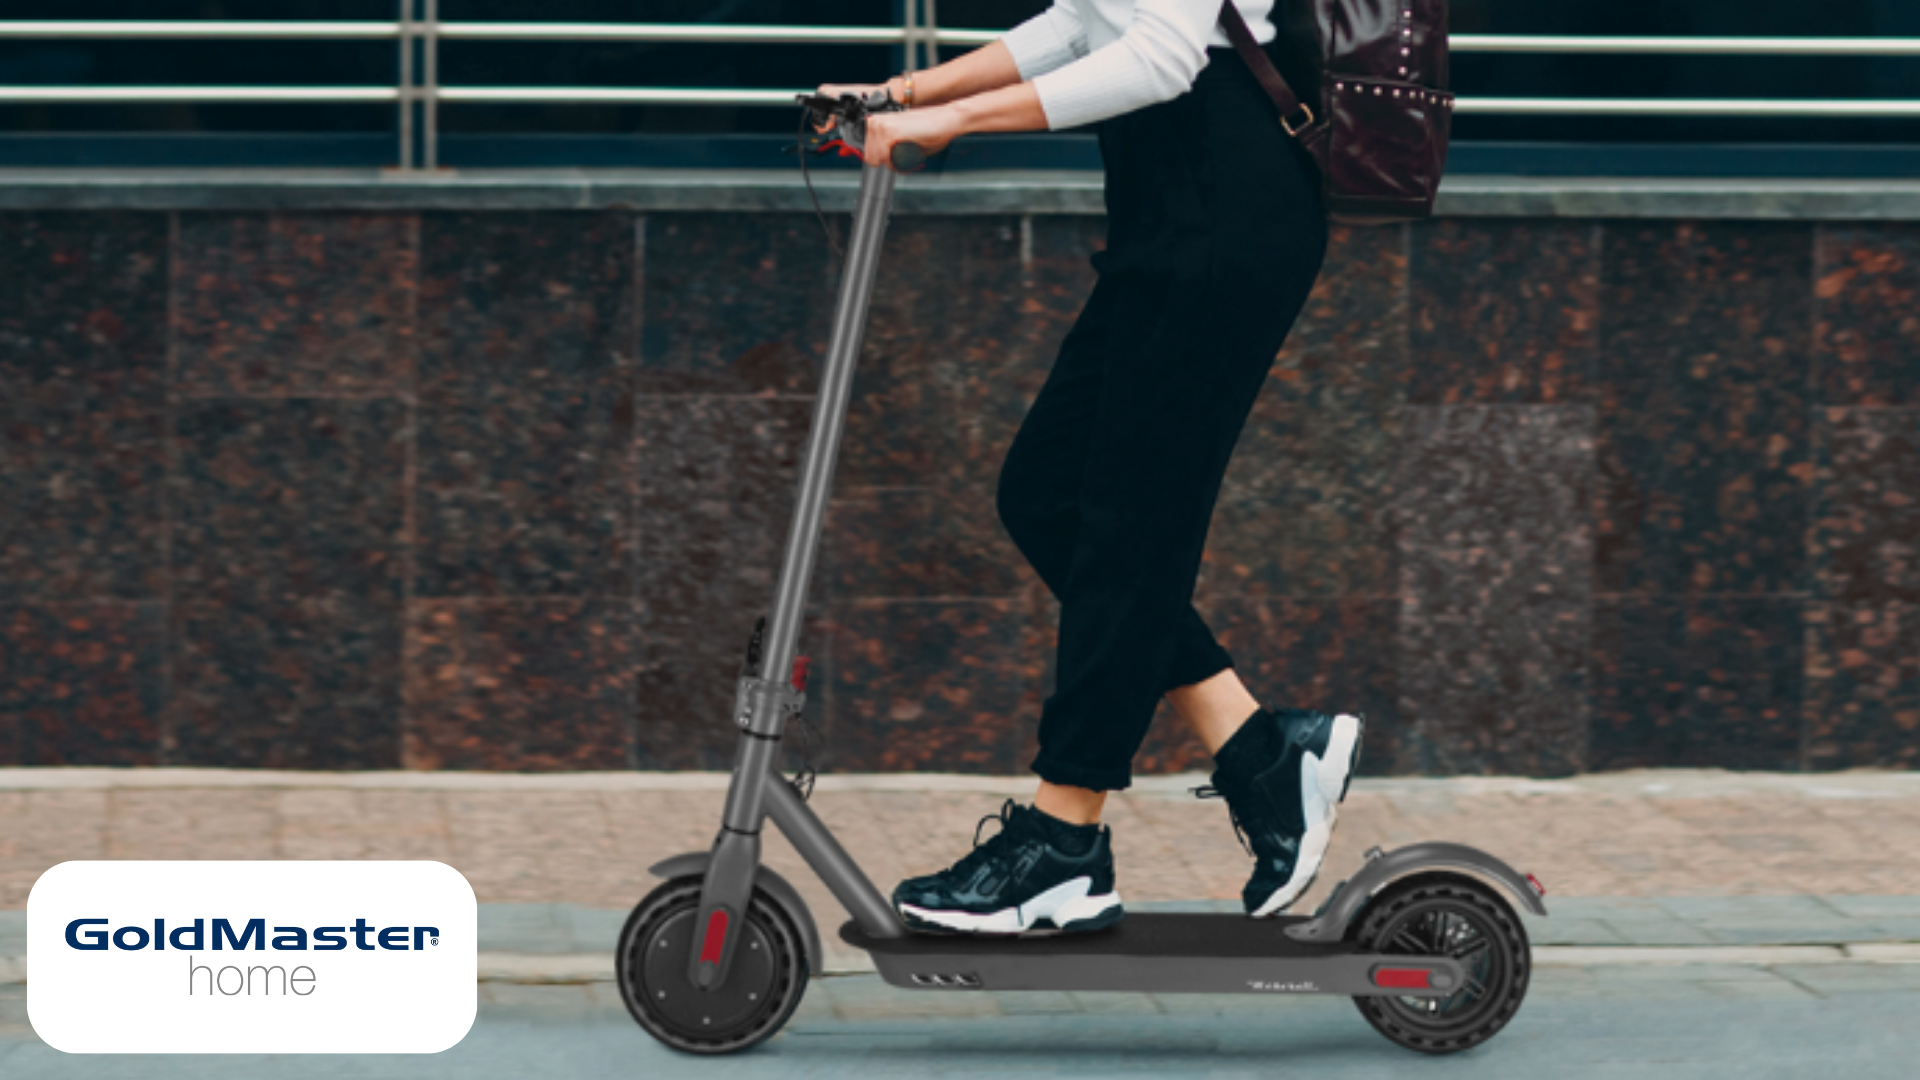  65% Discount on Scooters at Gold Master Home!